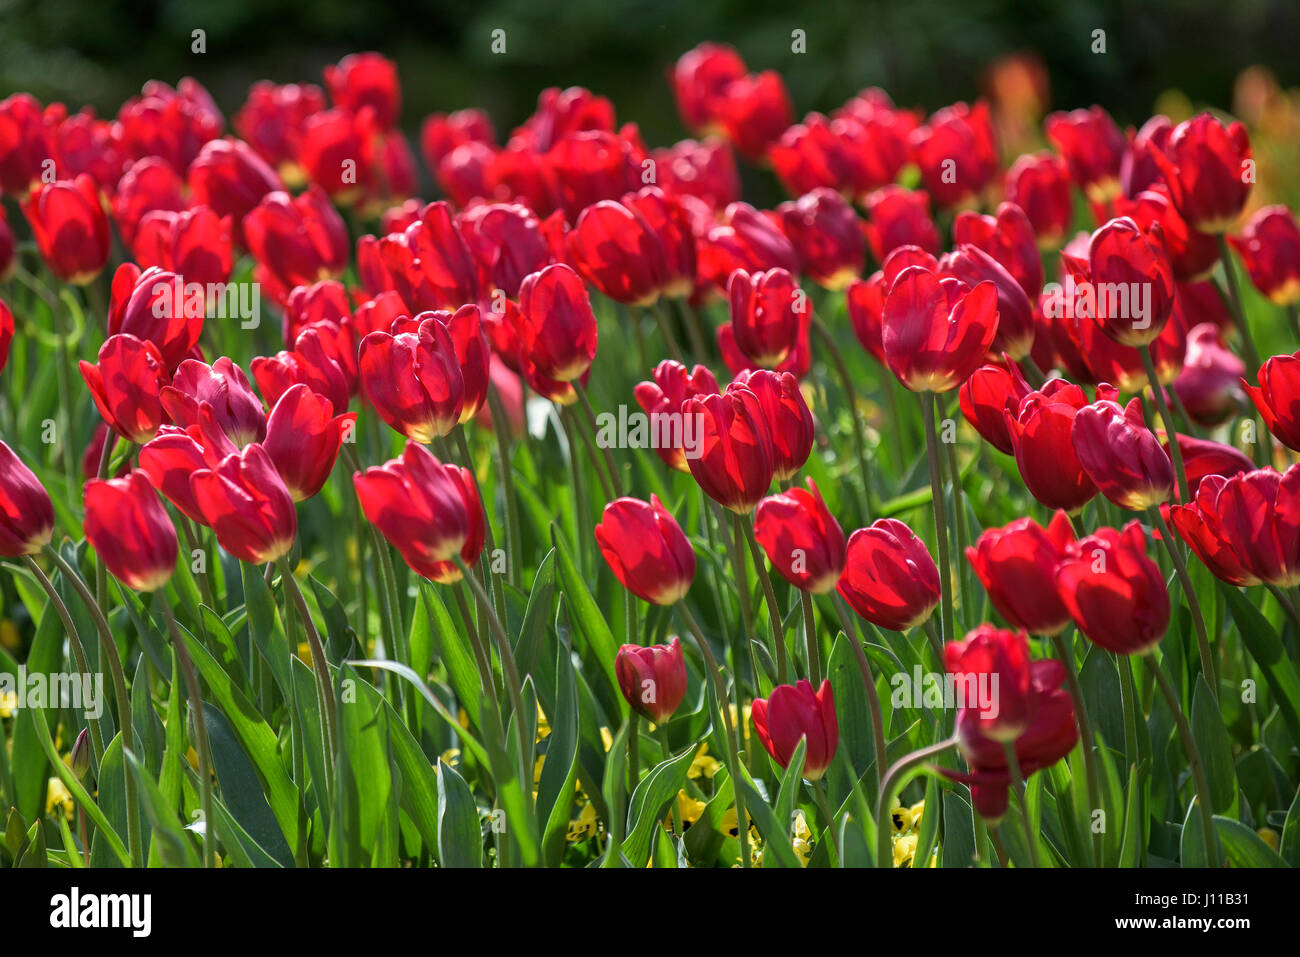 Flowers; Tulips; Tulipa; Perennial; Bedding plant; Plant; Bloom; Petals; Vibrant; Red; Colourful; Colorful; Garden; Gardening; Horticulture Stock Photo